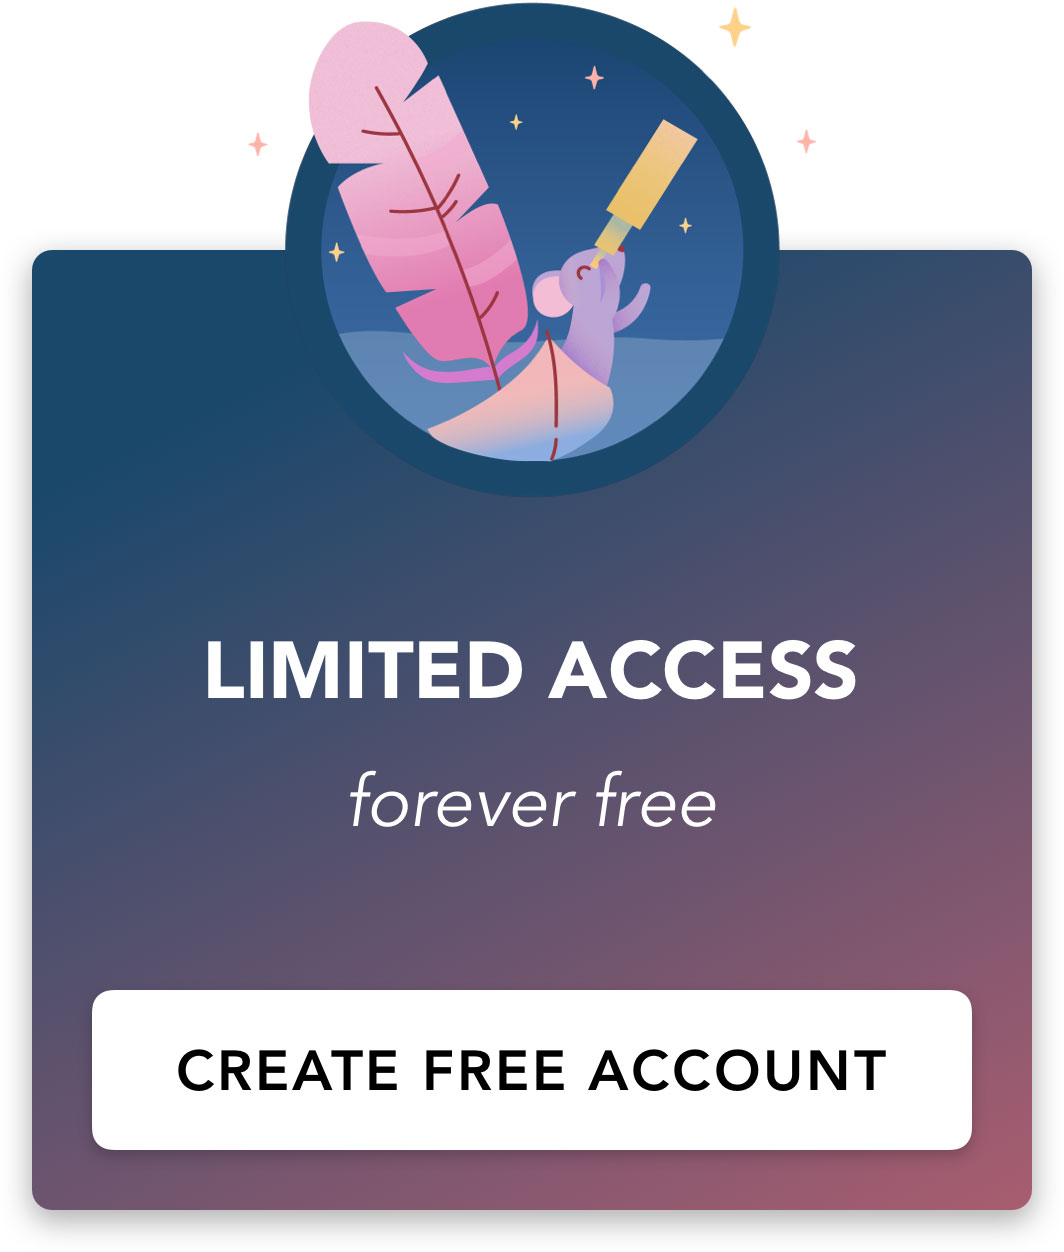 FREE LIMITED ACCESS